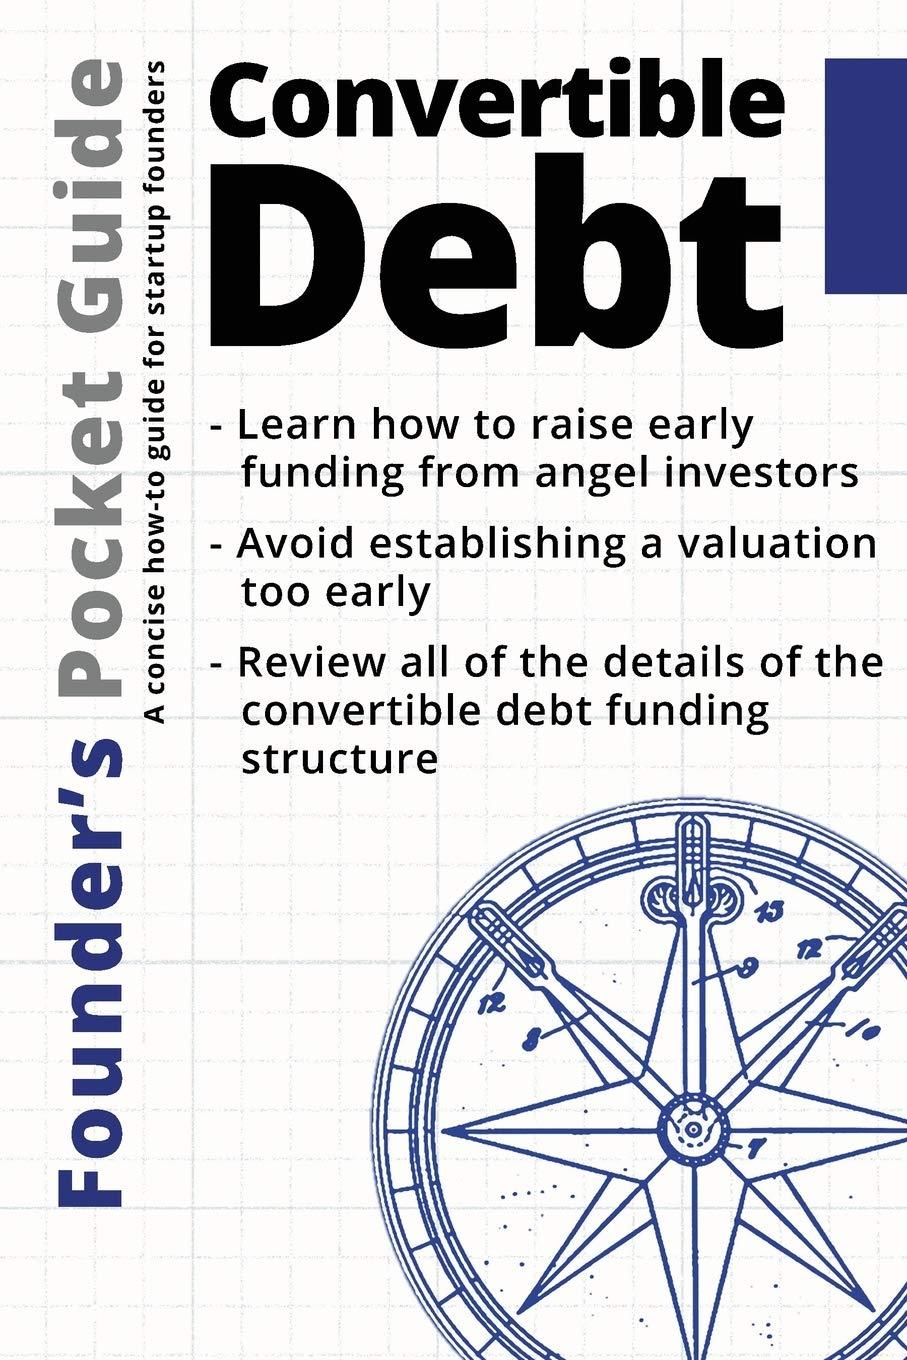 Founders Pocket Guide Convertible Debt